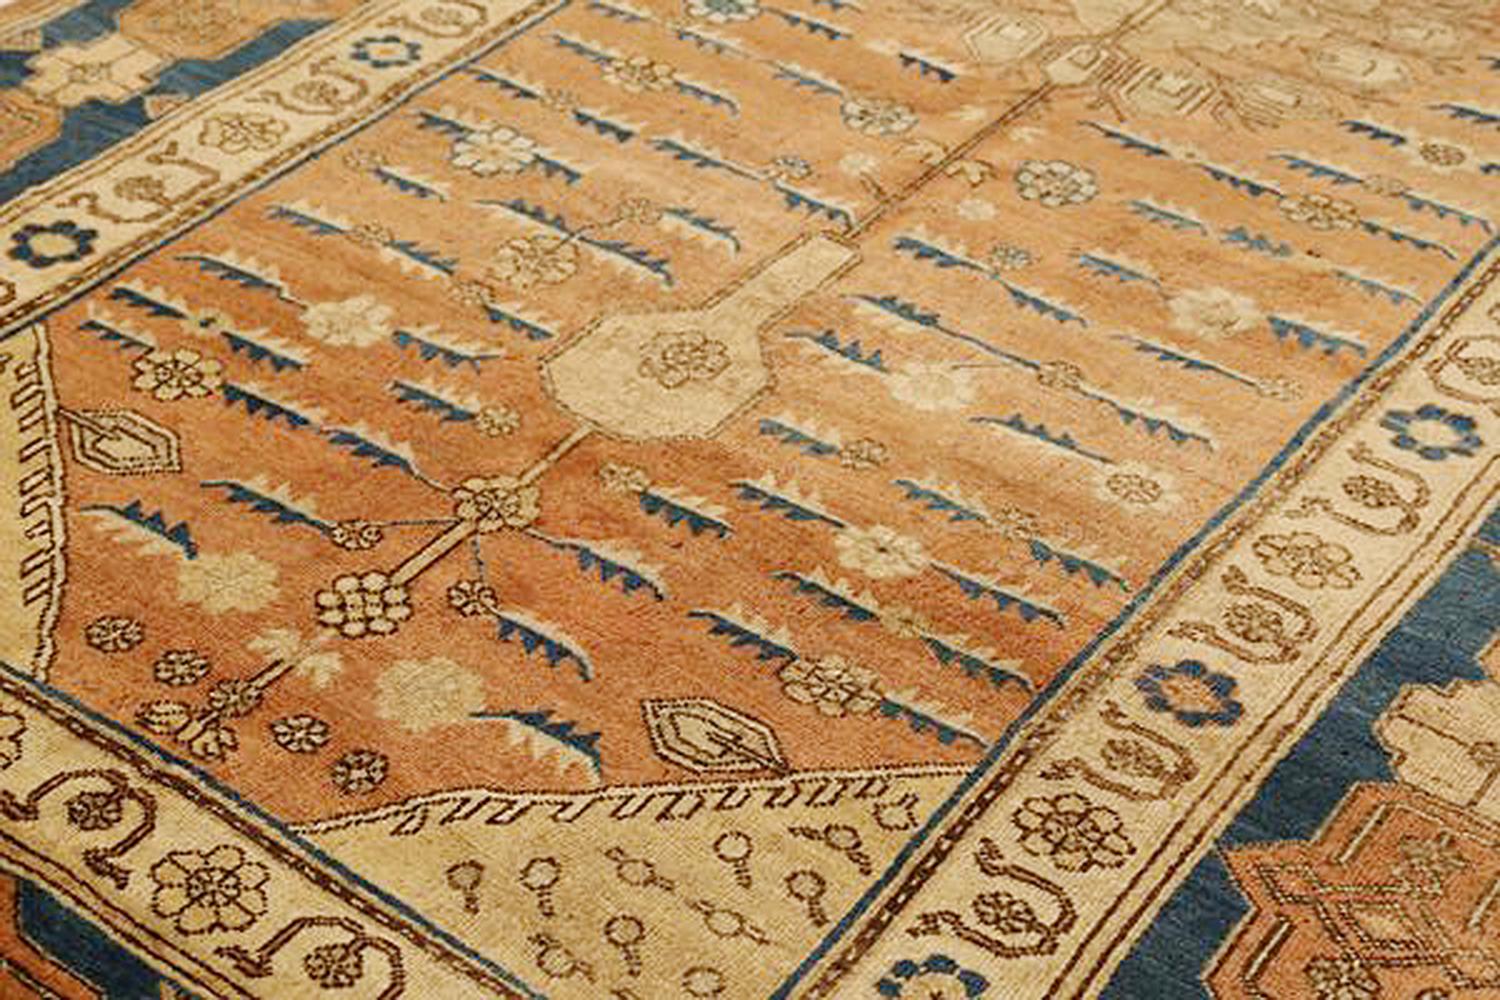 Antique Russian Khotan Rug with Blue and Beige Floral Patterns on Brown Field In Excellent Condition For Sale In Dallas, TX